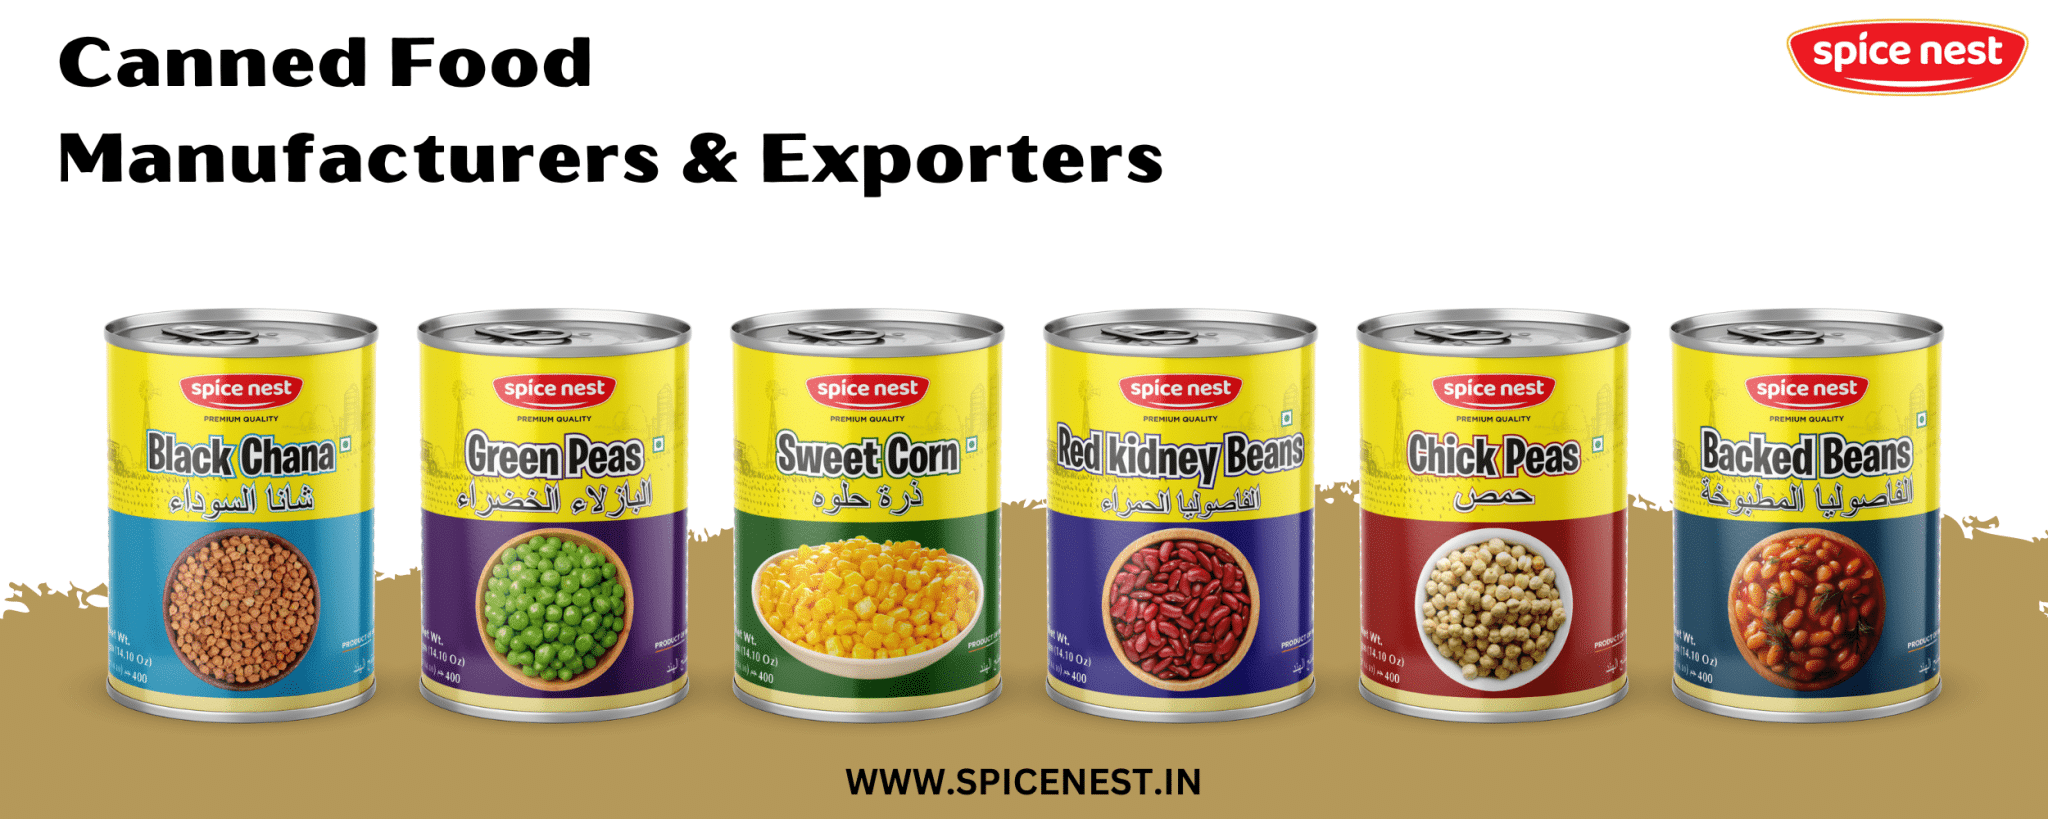 Canned Food Manufacturers & Exporters ​